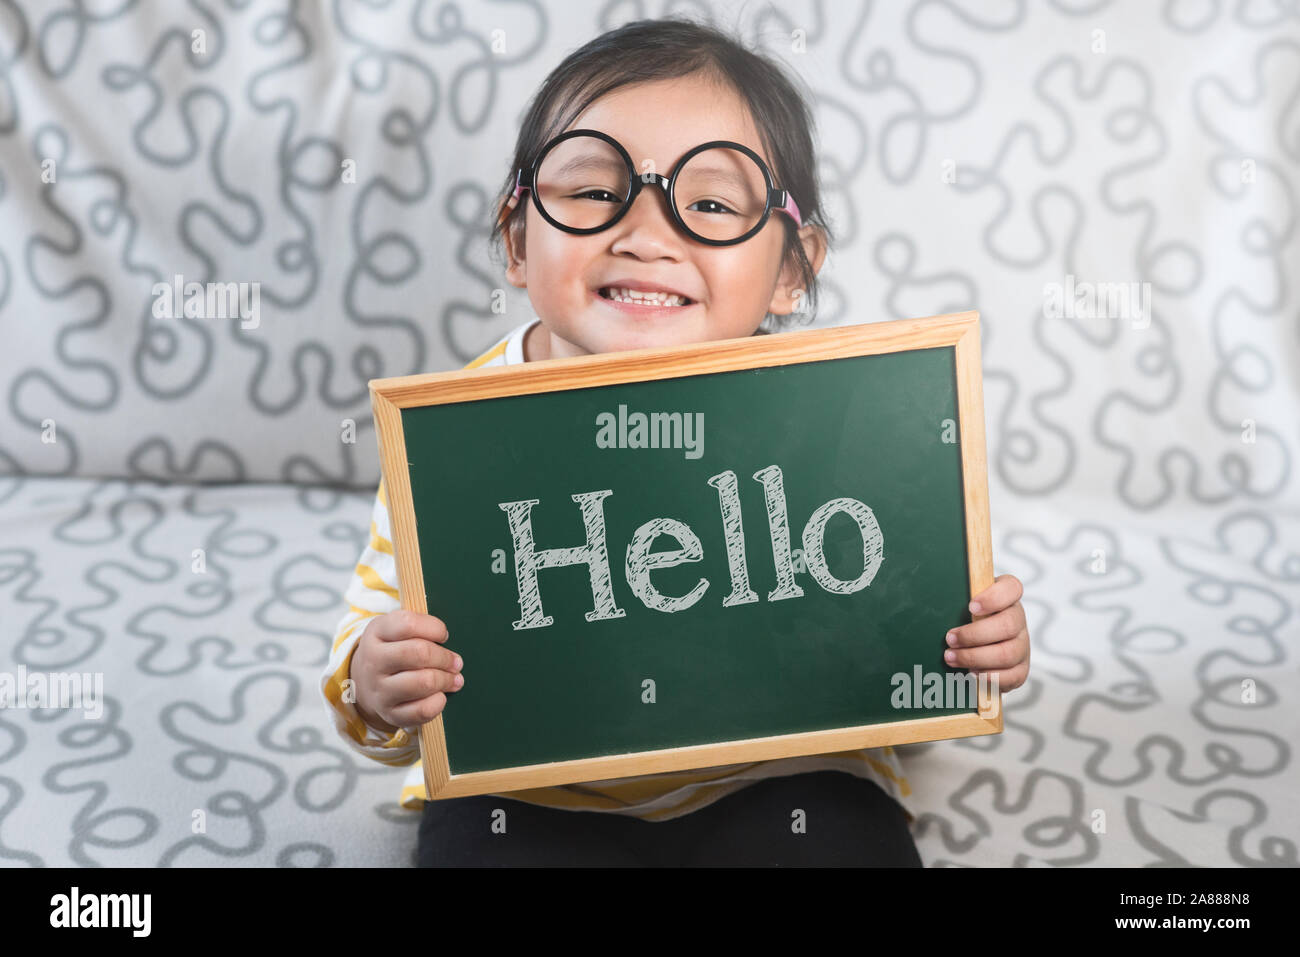 Little asian girl holding a chalkboard with a word HELLO. Concept of Hello day, Greetings, Introduction and lifestyle Stock Photo